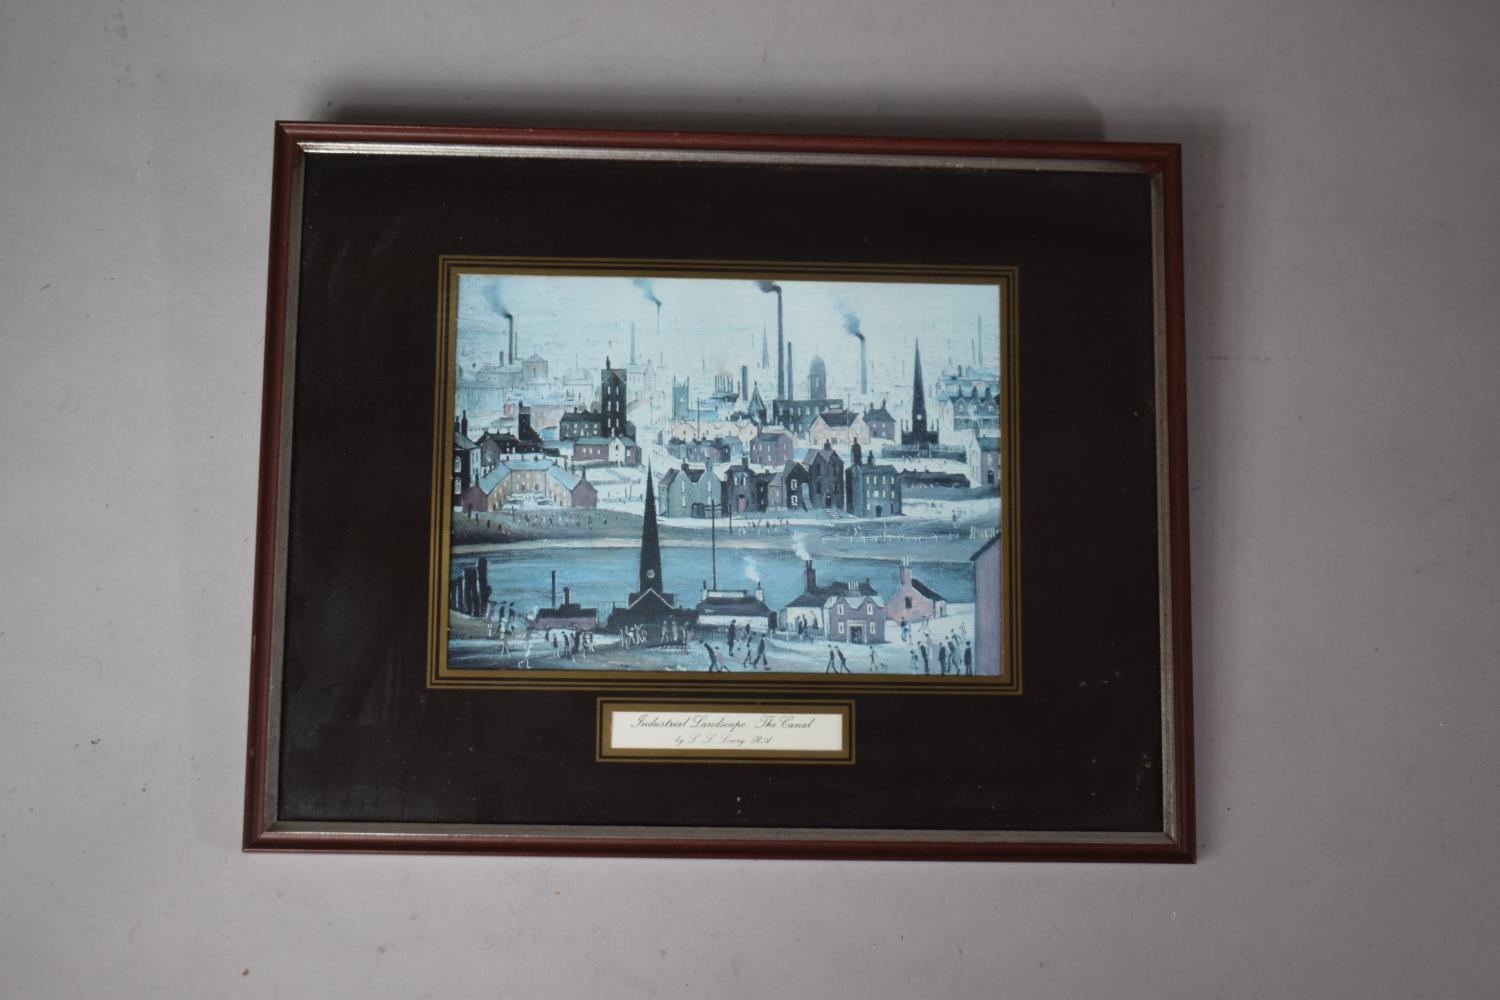 A Small Lowry Print, Industrial Landscape - A Canal